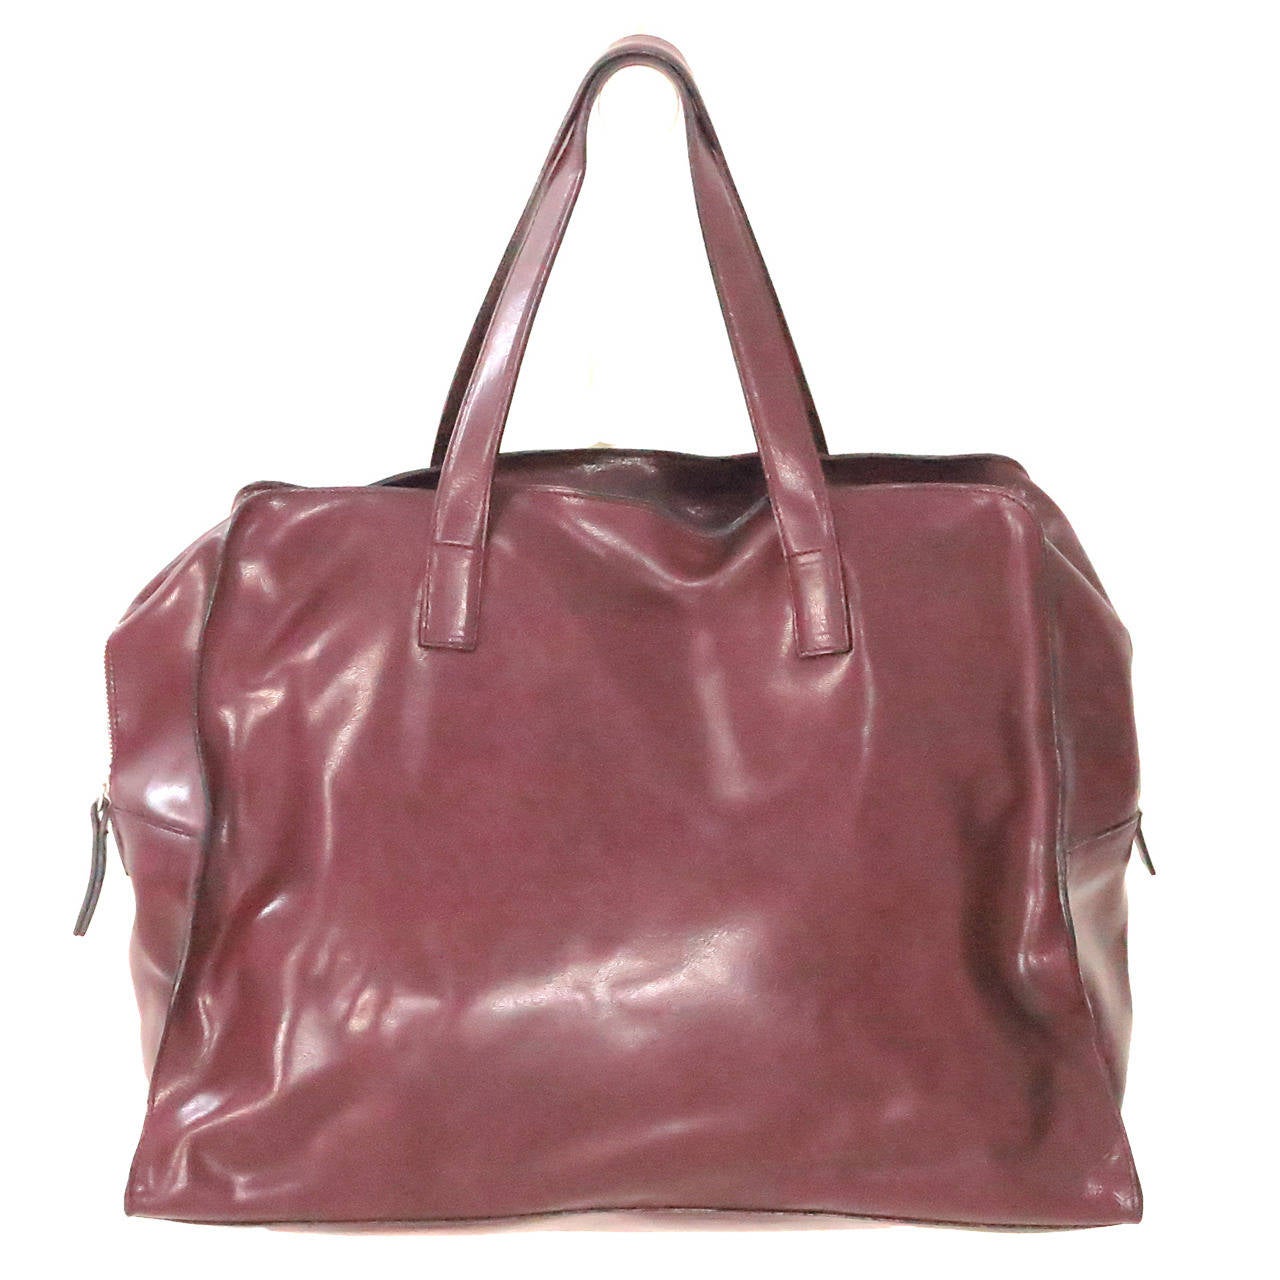 Strenesse Gabriele Strehle burgundy leather double handle tote bag